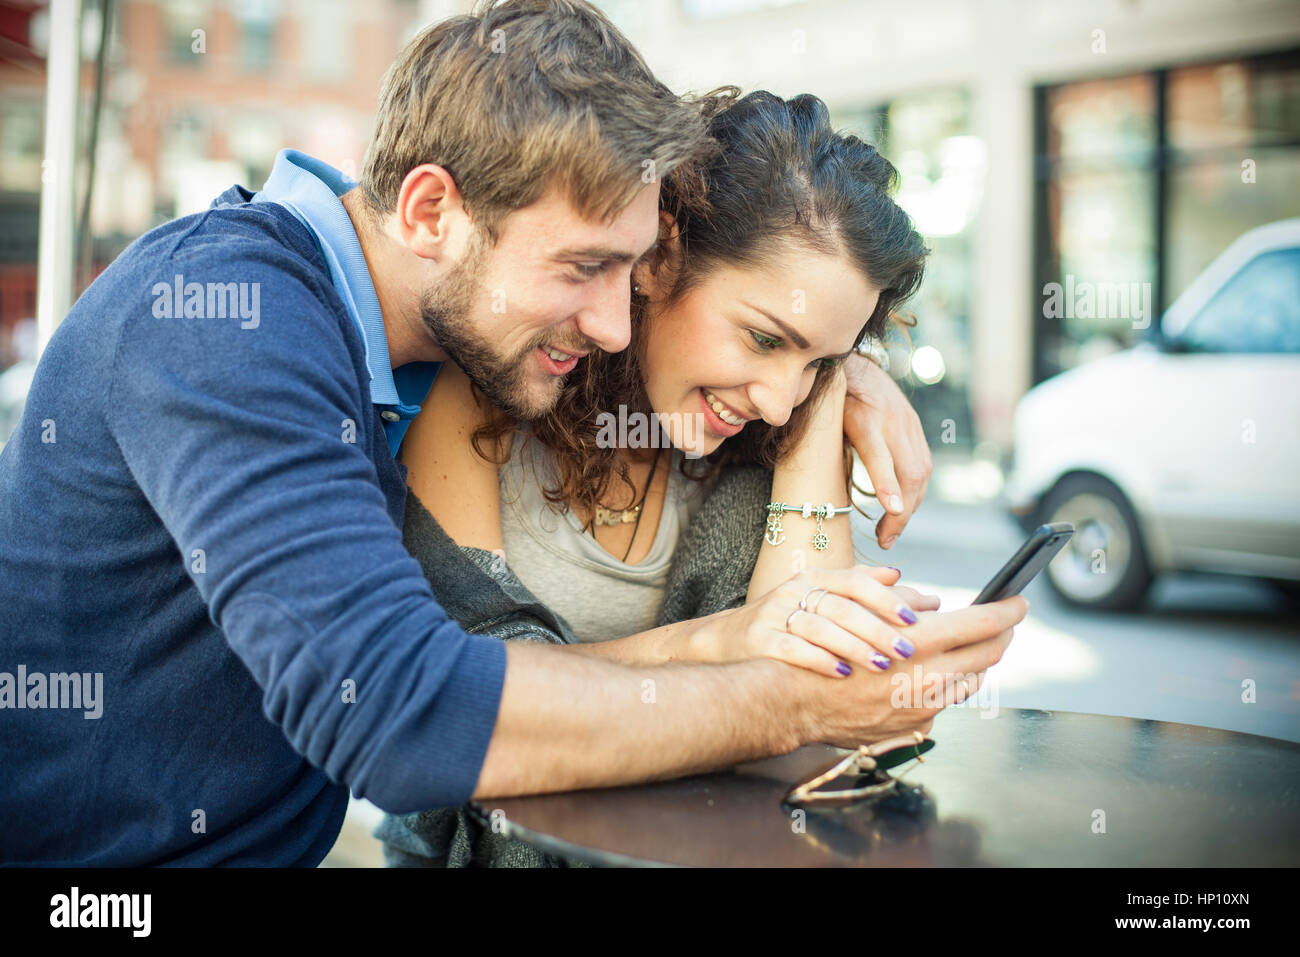 Couple sitting outdoors together, looking at smartphone Stock Photo